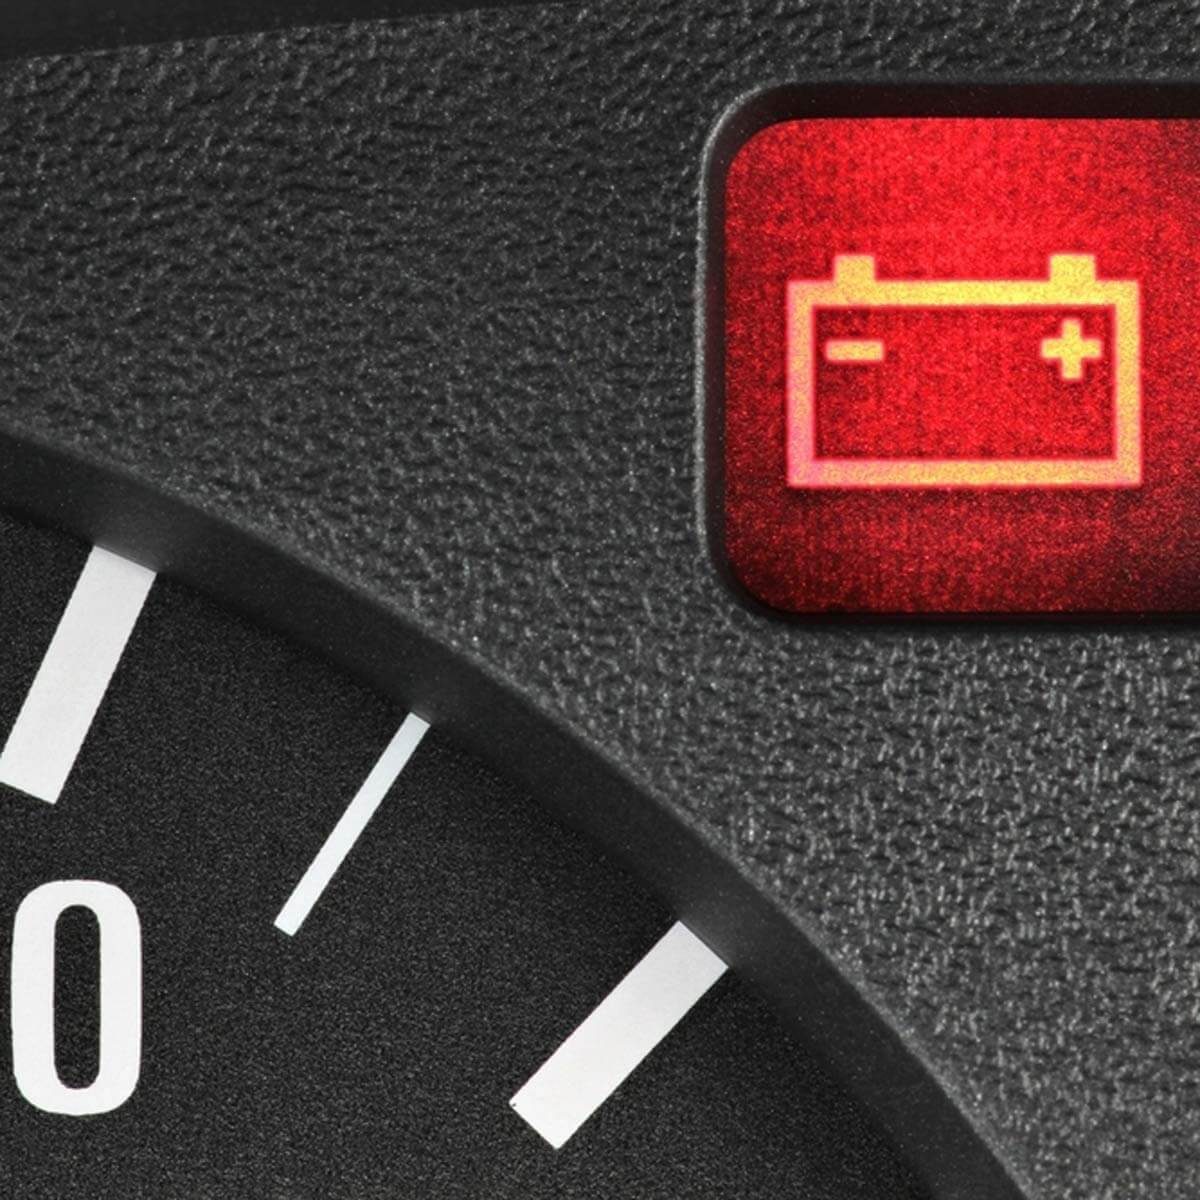 How to Charge a Car Battery: Step-by-Step Guide - Car and Driver